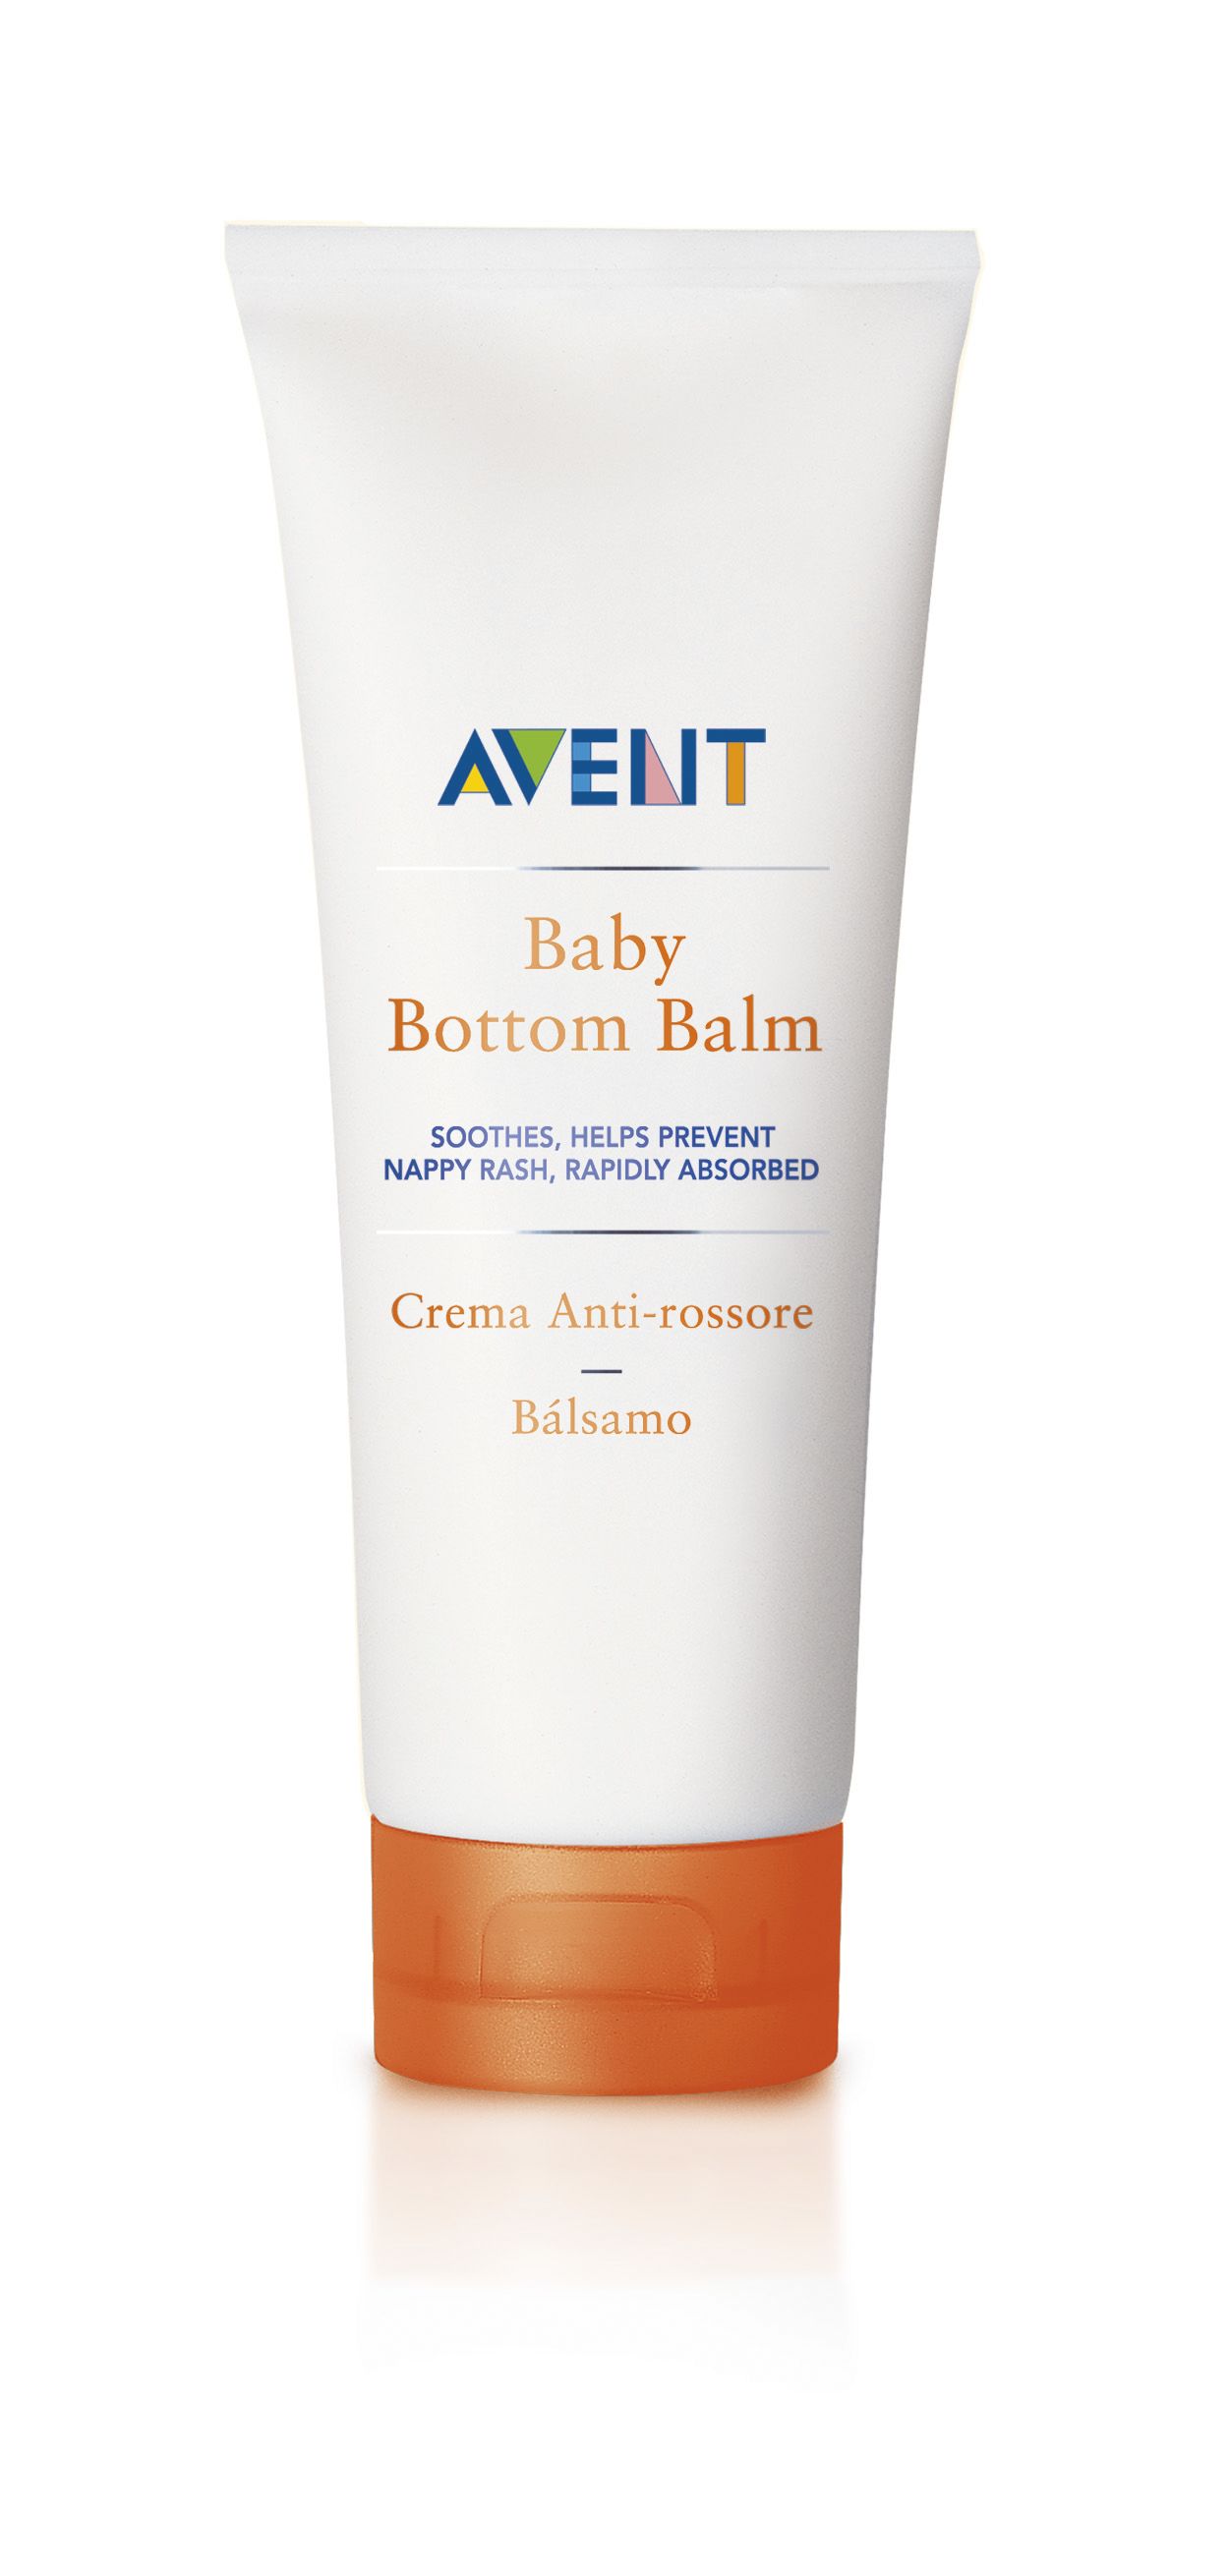 Soothes, helps prevent nappy rash, rapidly absorbs